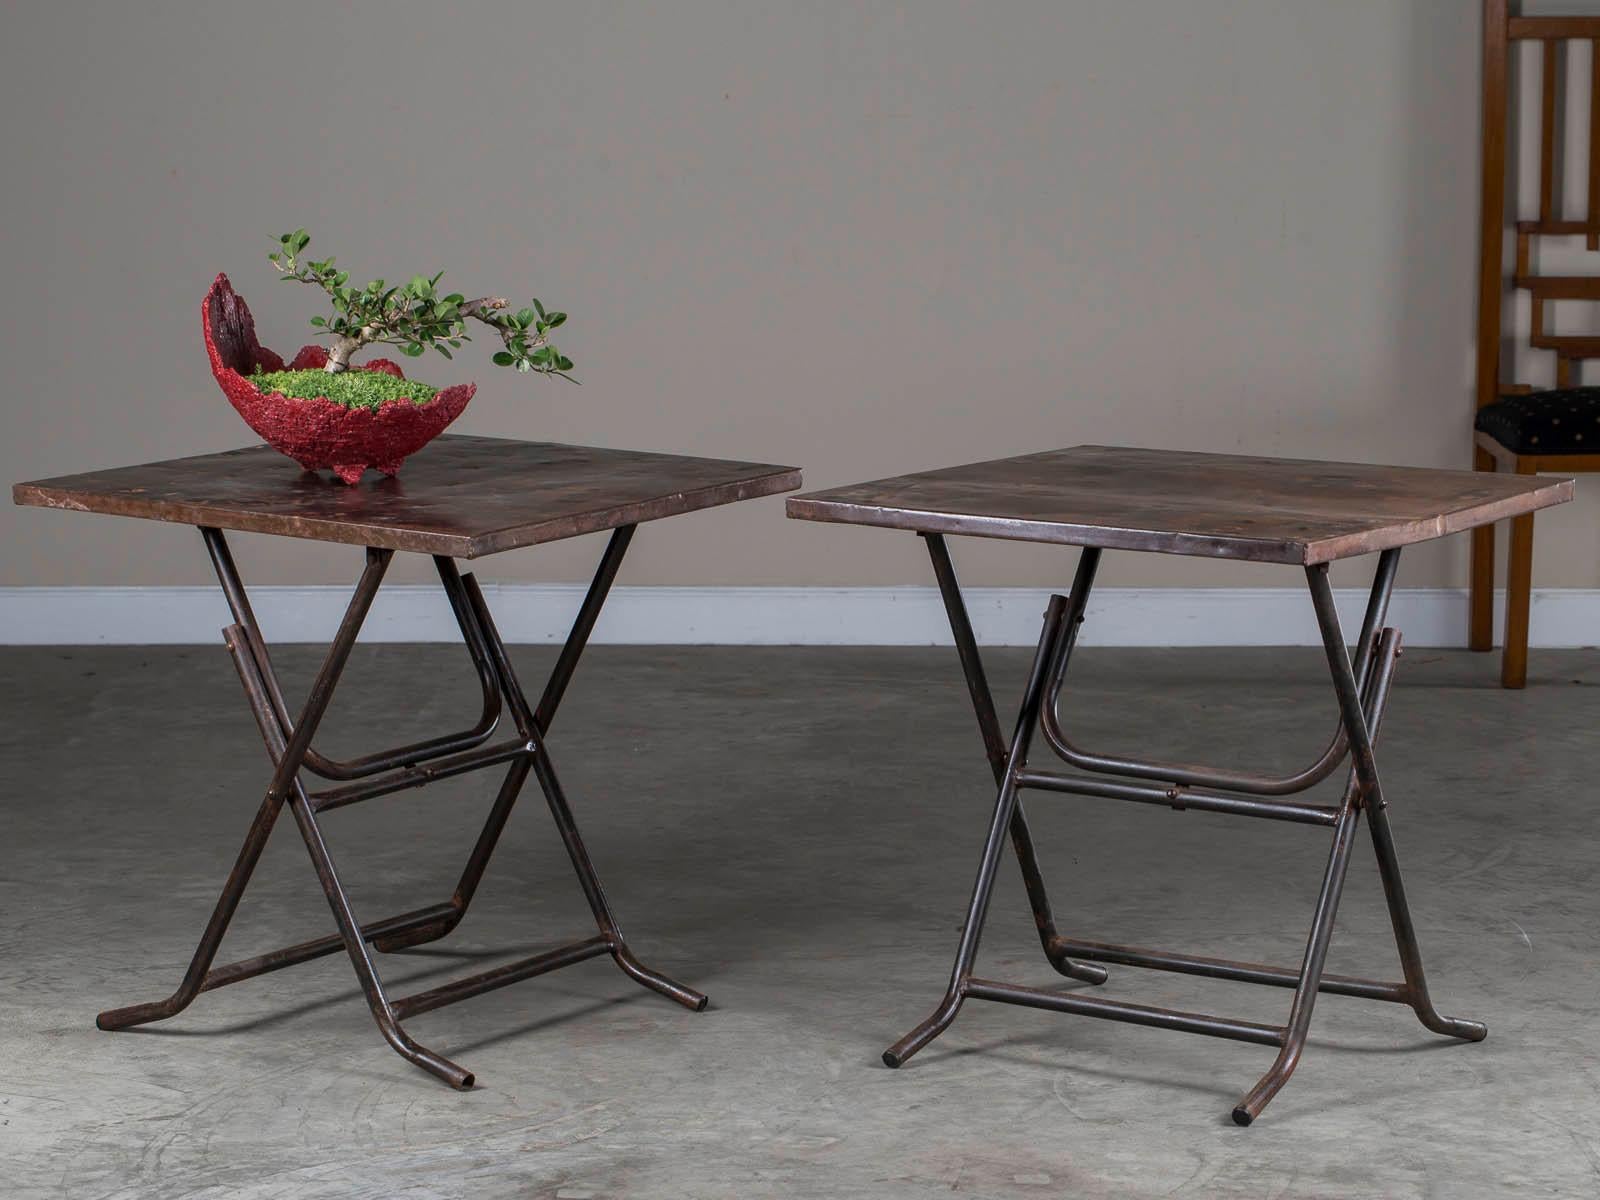 Pair of Square Metal Folding Tables Tubular Metal Legs Found in Asia 1